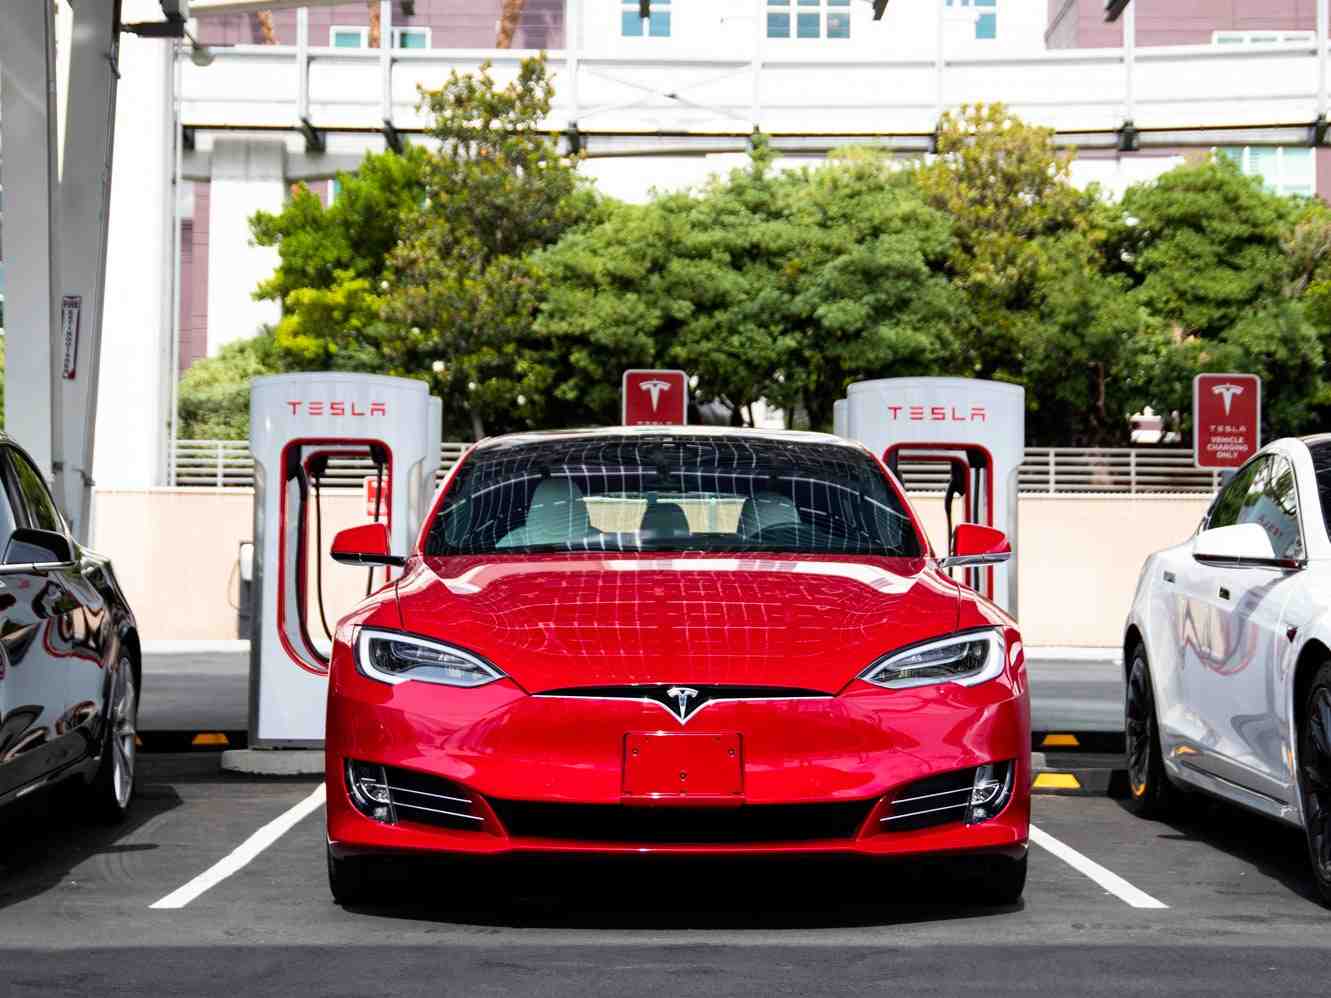 How much does it cost to charge a Tesla at a charging station?